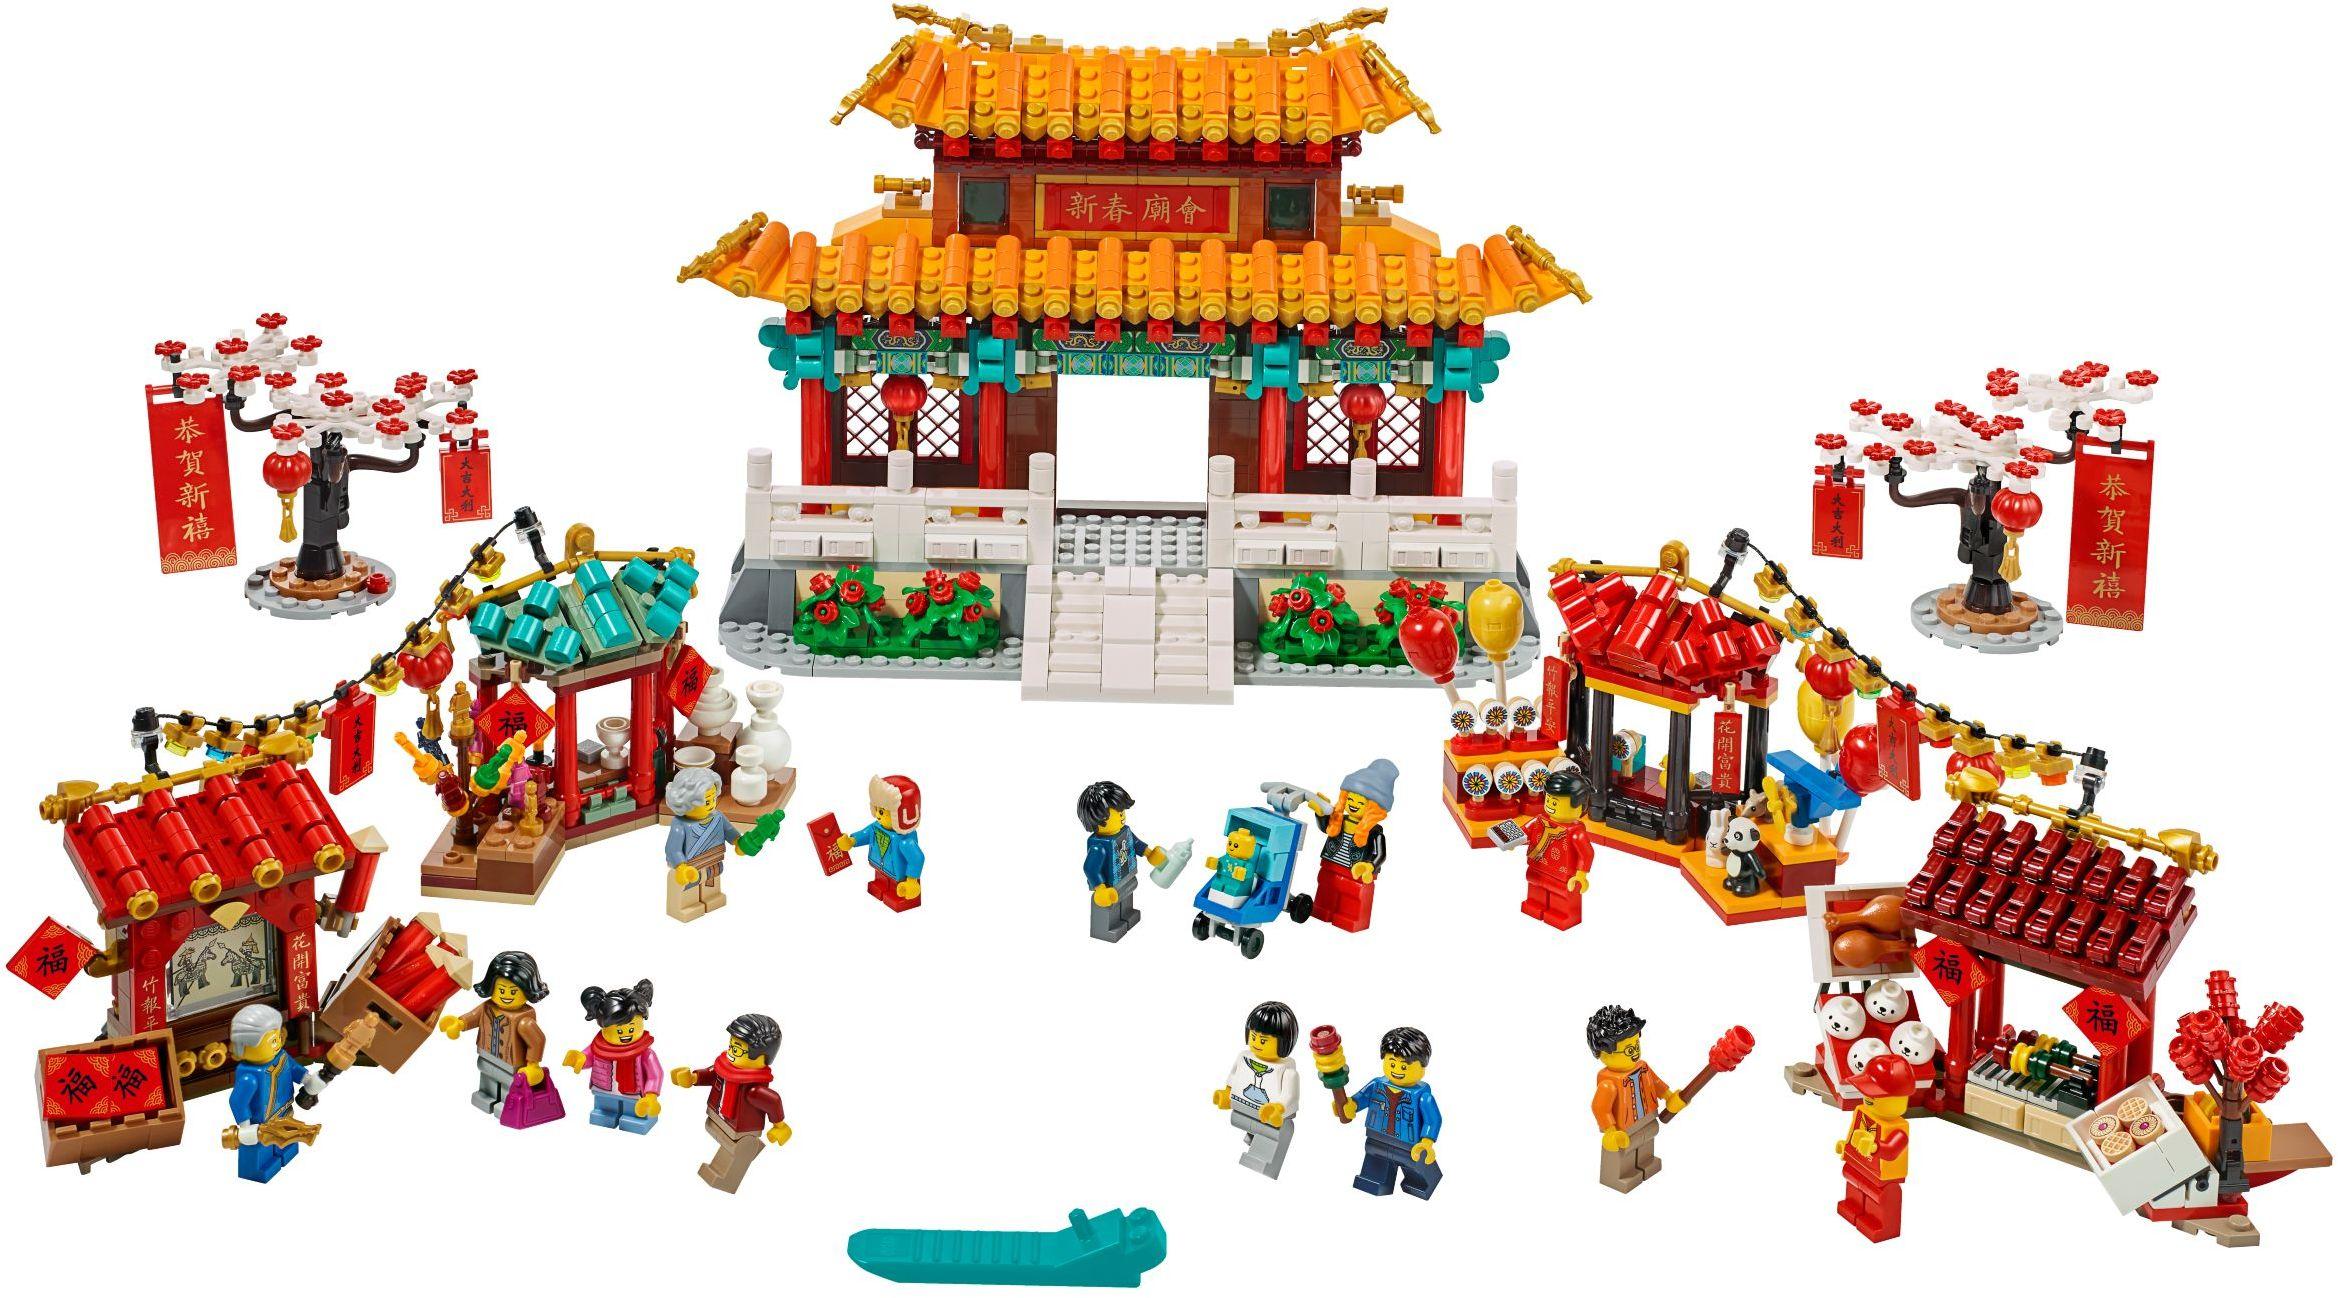 Chinese New Year sets will be available to all